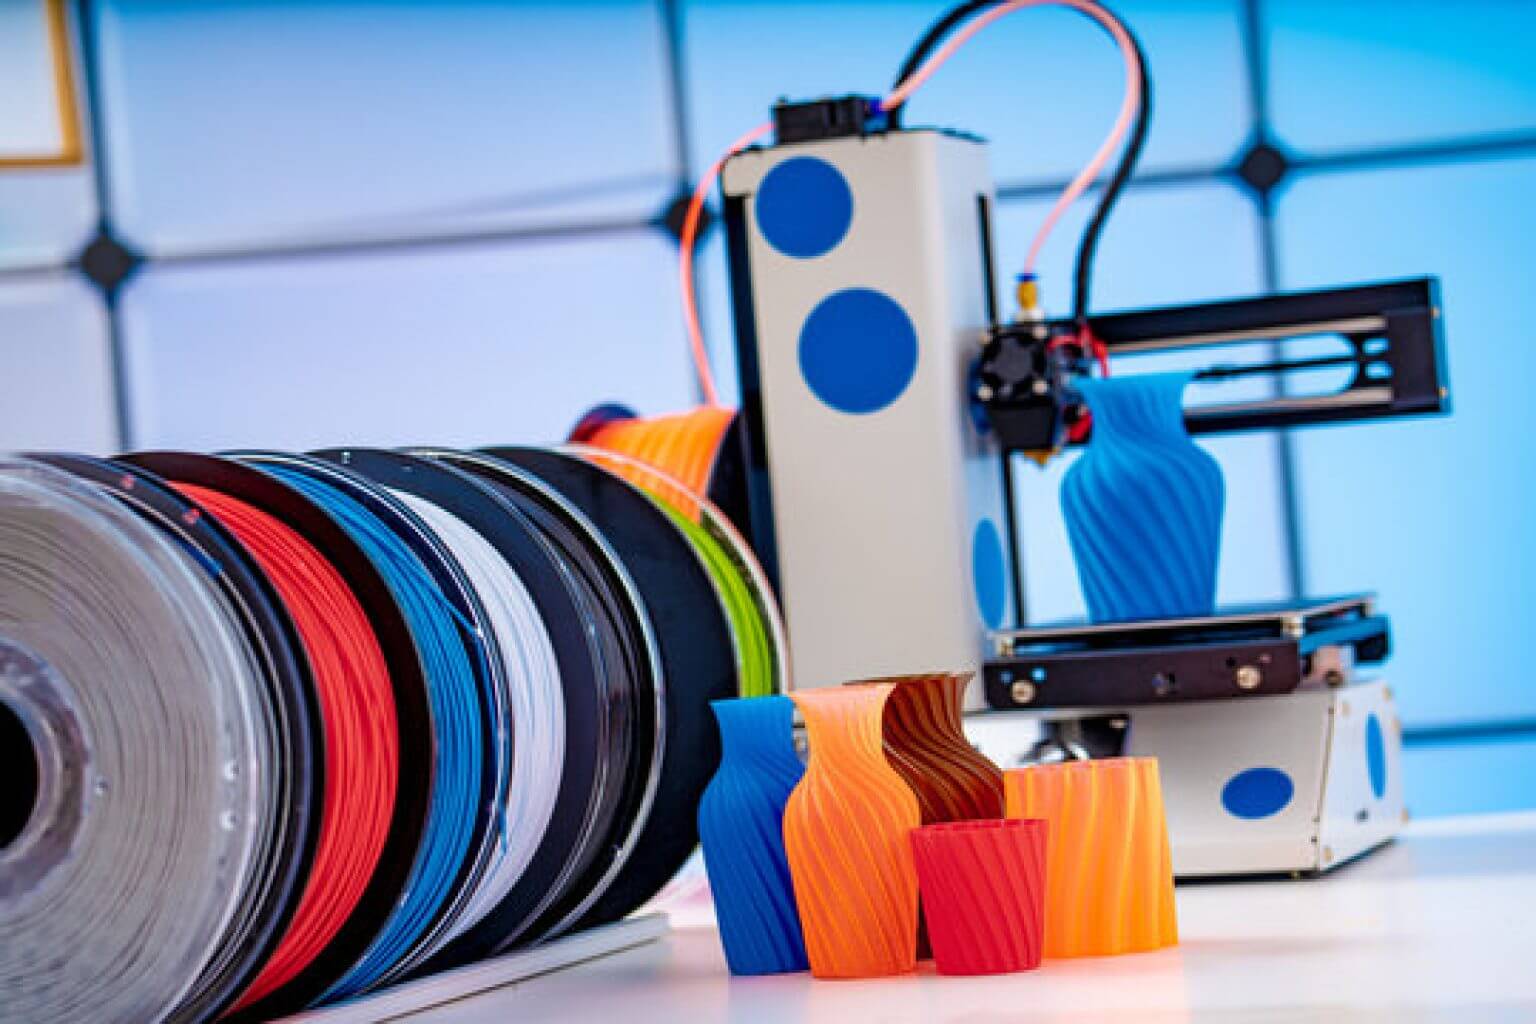 What is a Filament?